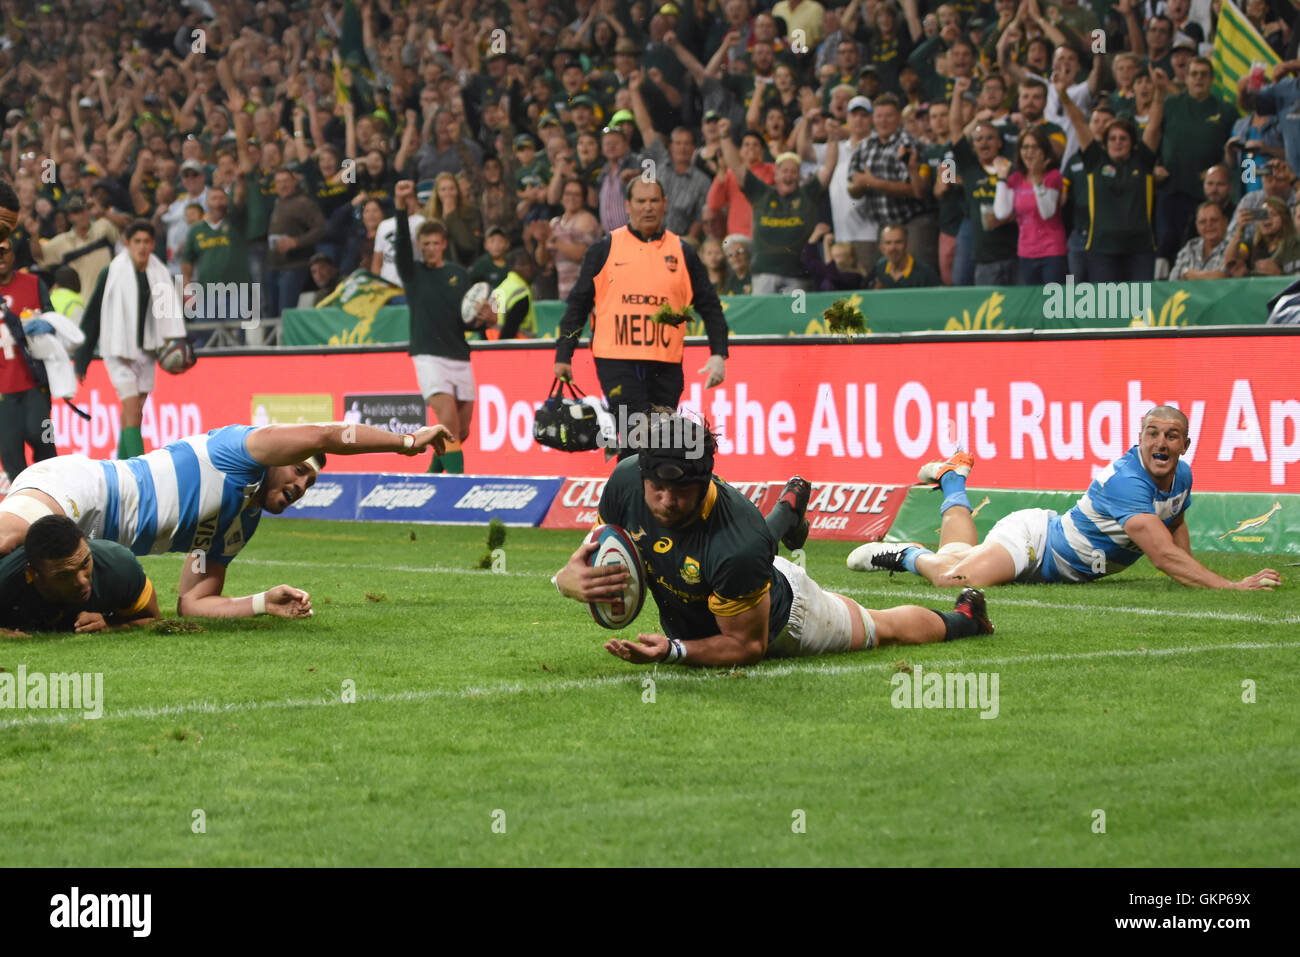 Nelspruit, South Africa. 20 August 2016. The South African National Rugby team in action against the Pumas at Mbombela Stadium. Warren Whiteley diving over to score the winning try Stock Photo